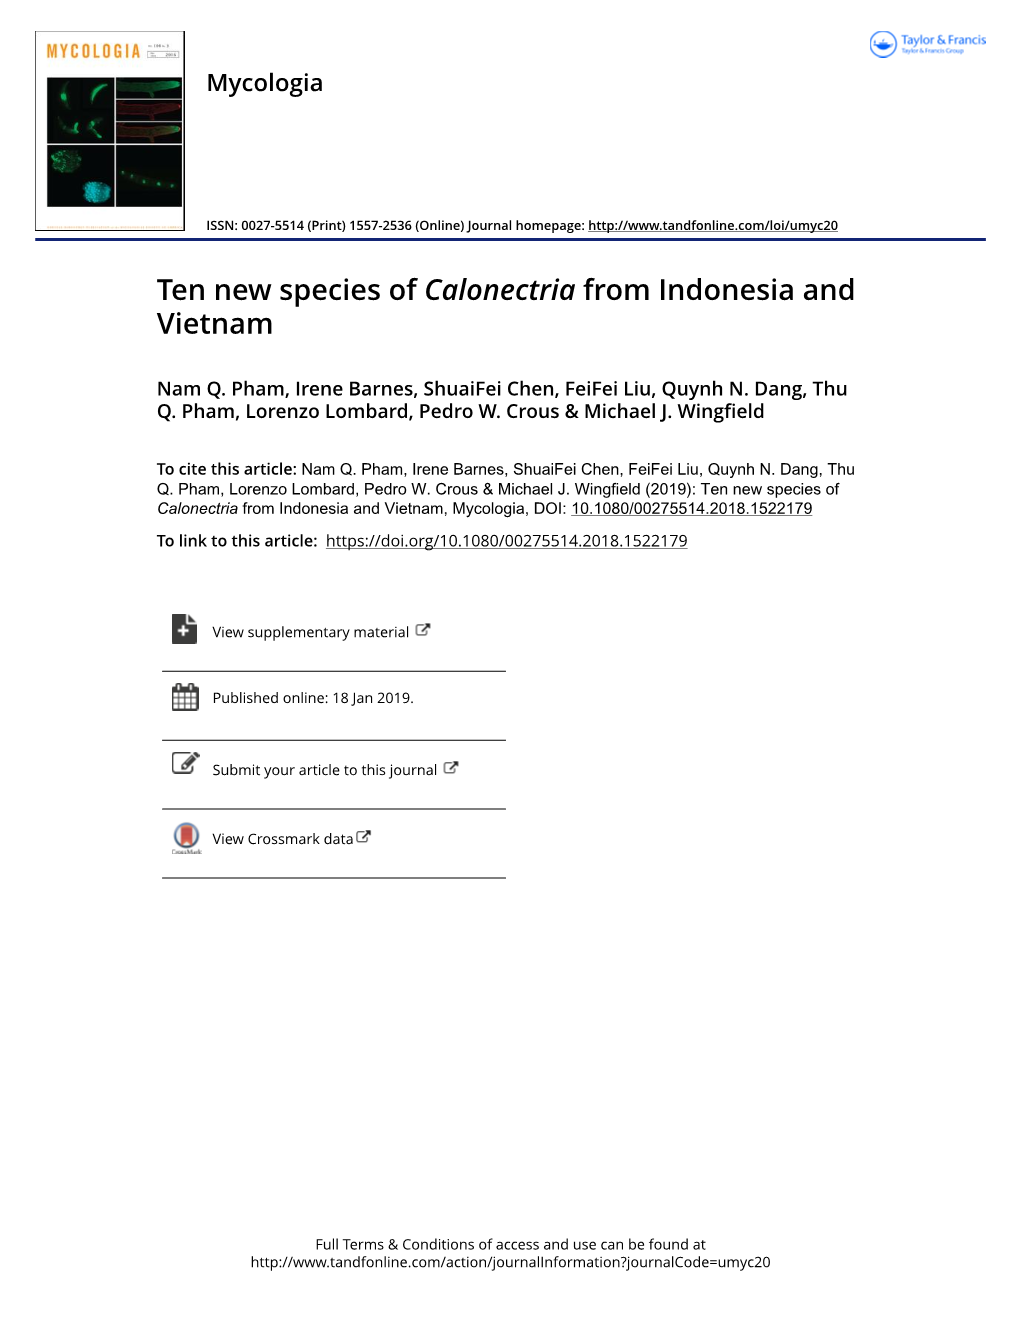 Ten New Species of Calonectria from Indonesia and Vietnam